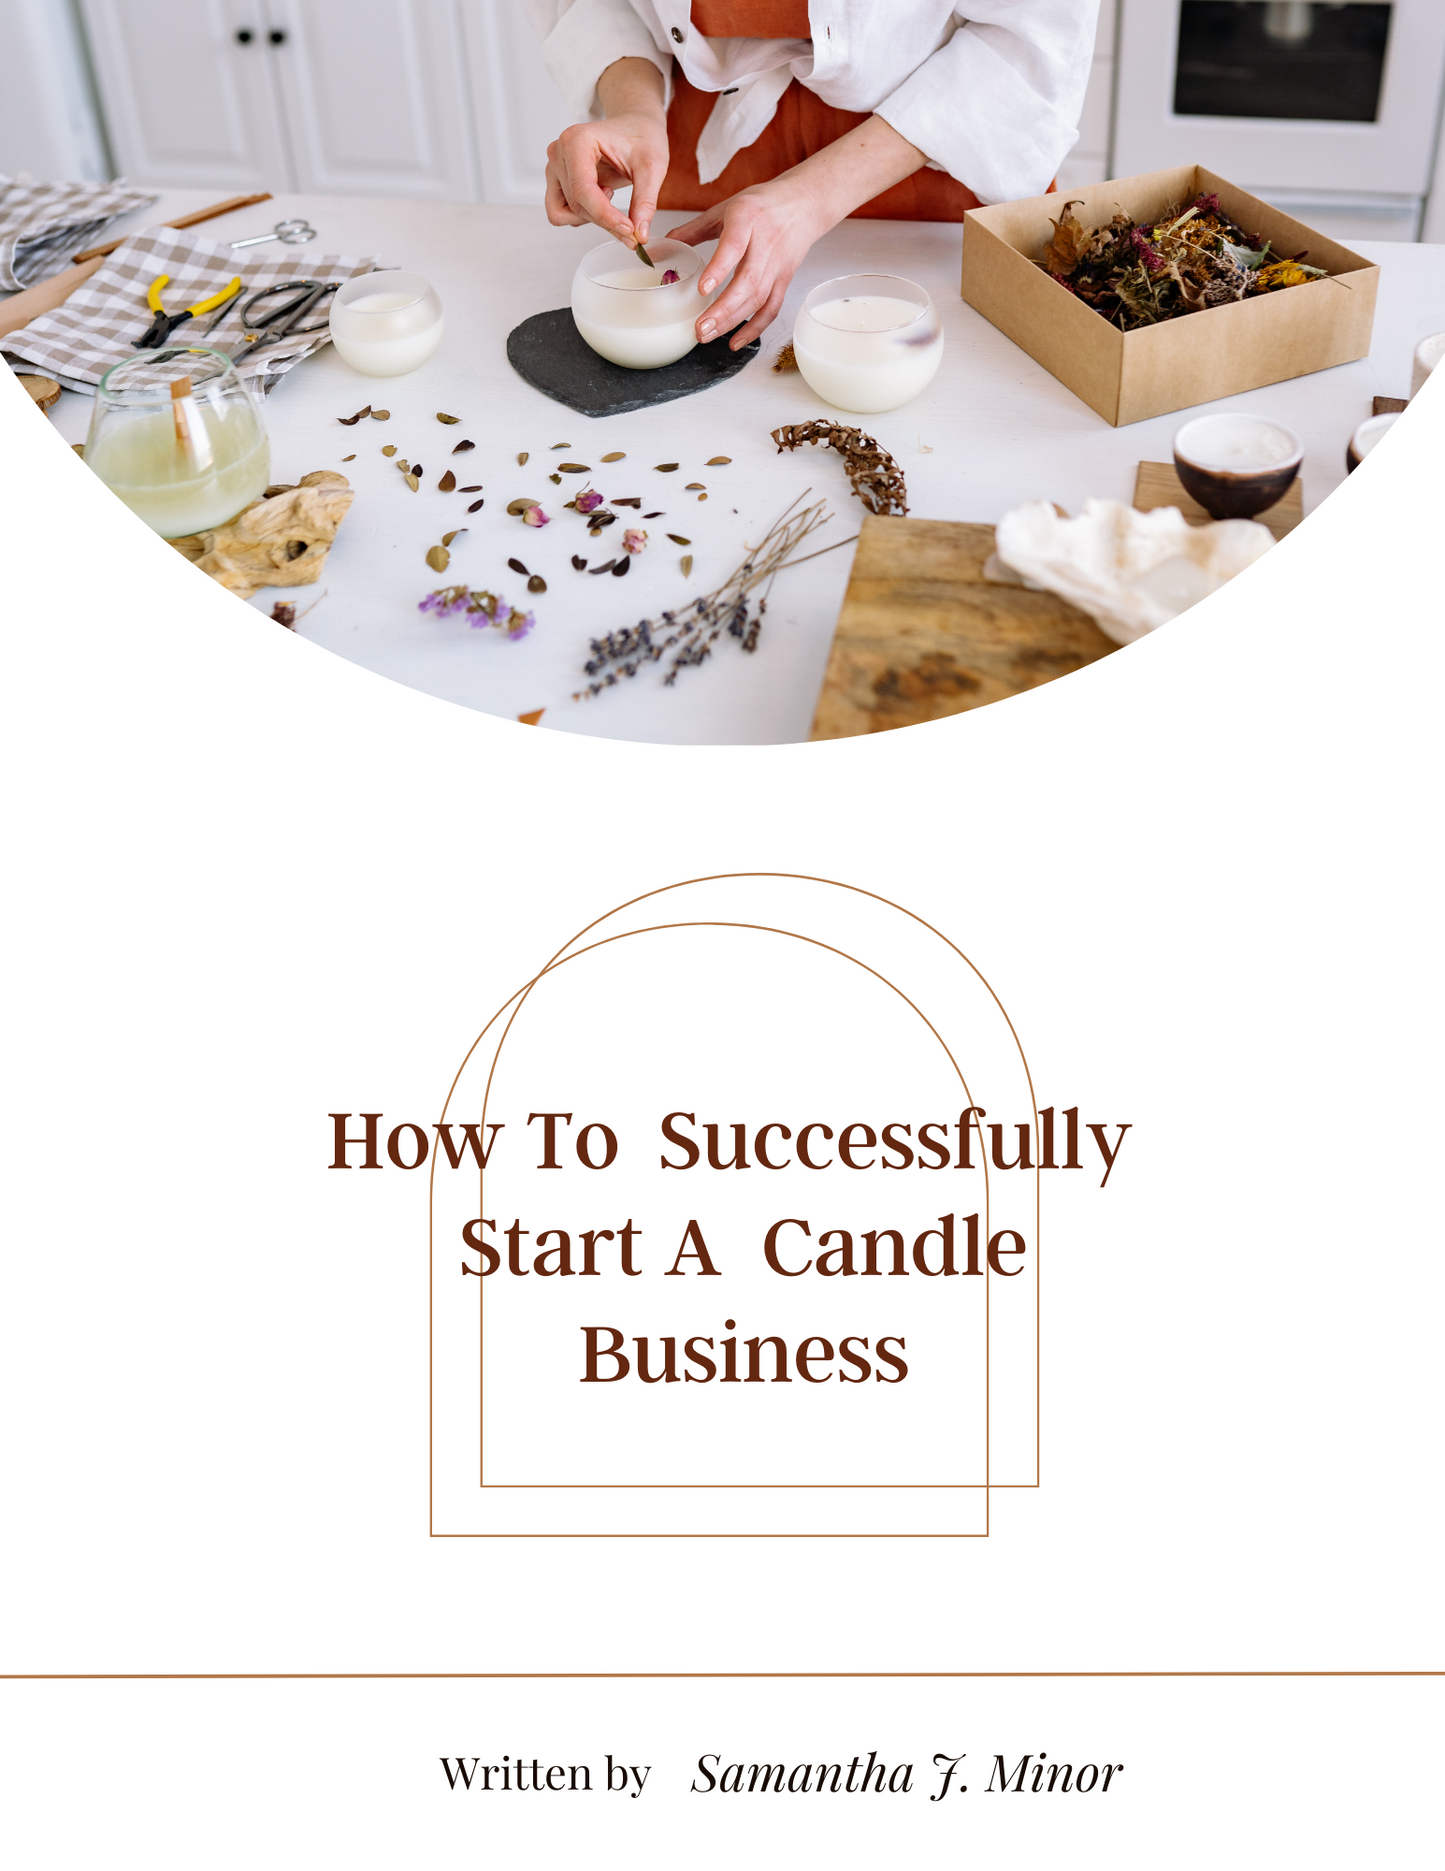 How to successfully start a candle business ebook